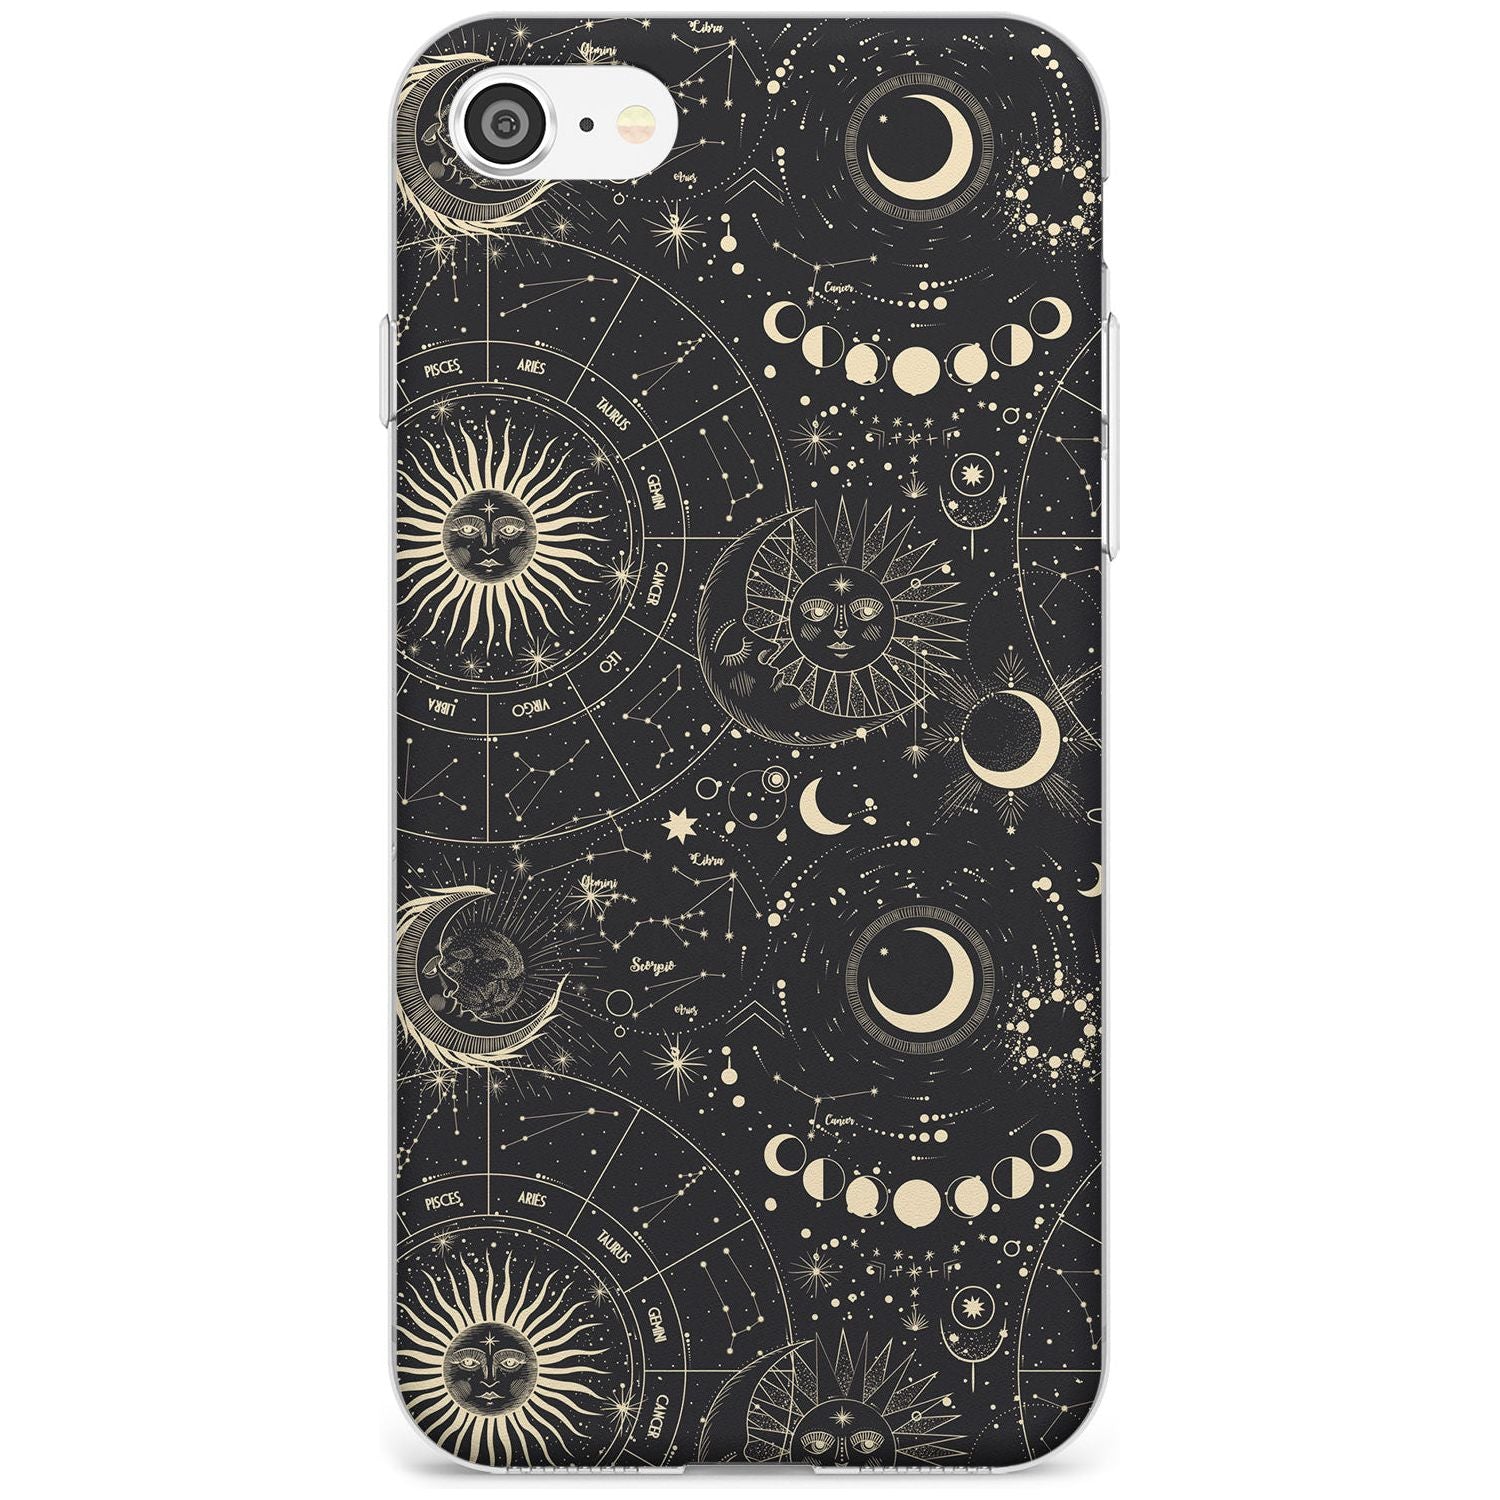 Suns, Moons & Star Signs Black Impact Phone Case for iPhone SE 8 7 Plus